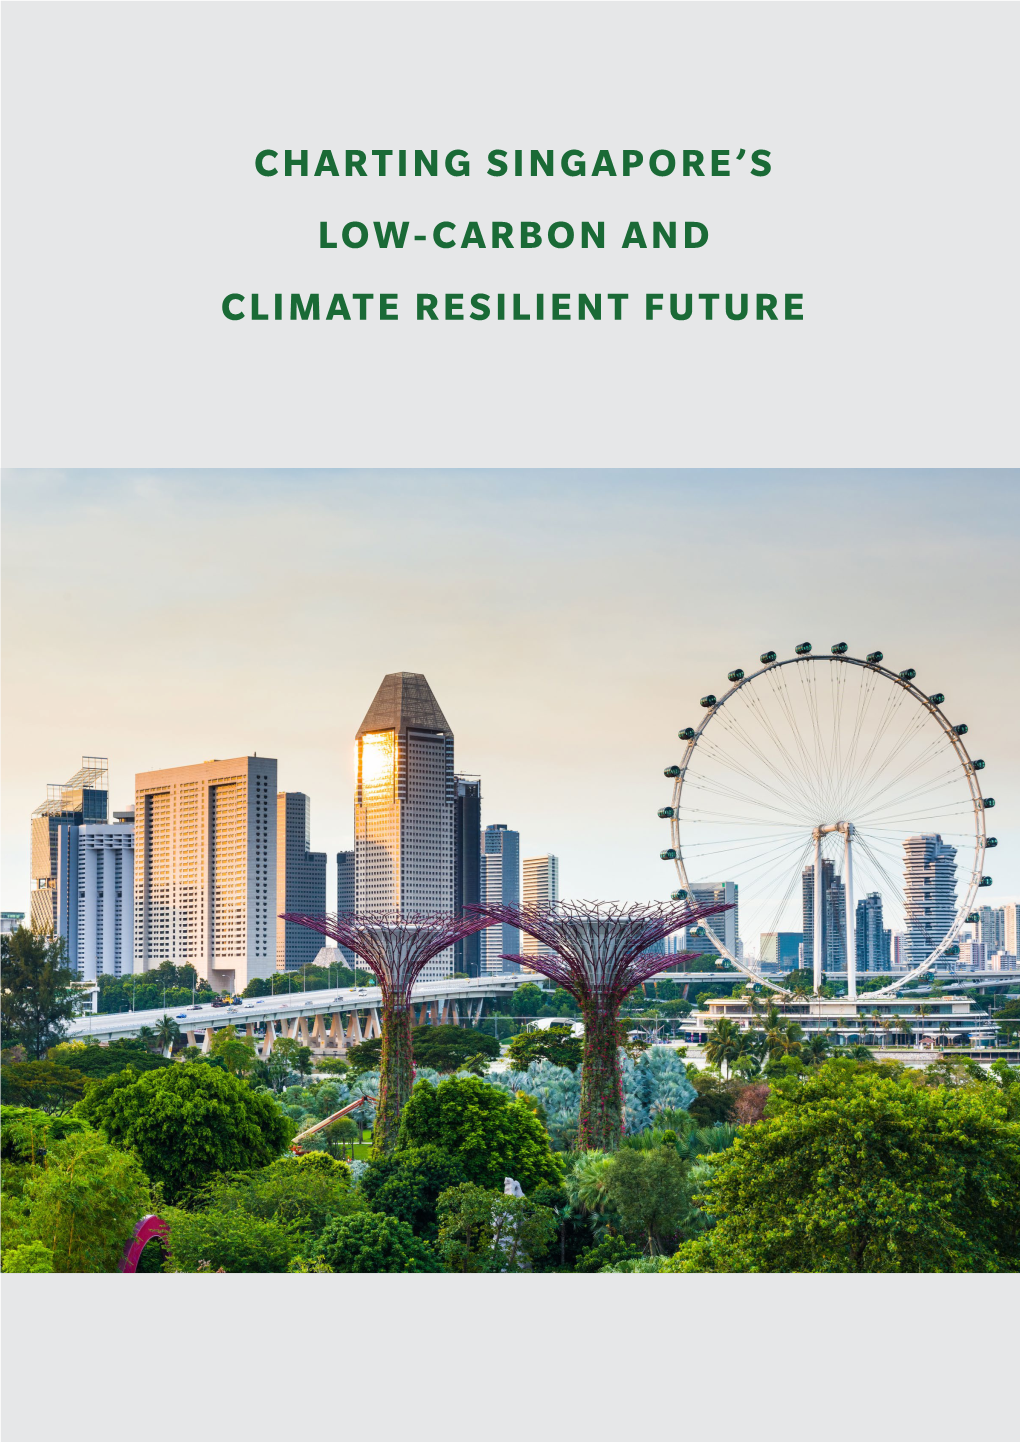 Charting Singapore's Low-Carbon and Climate